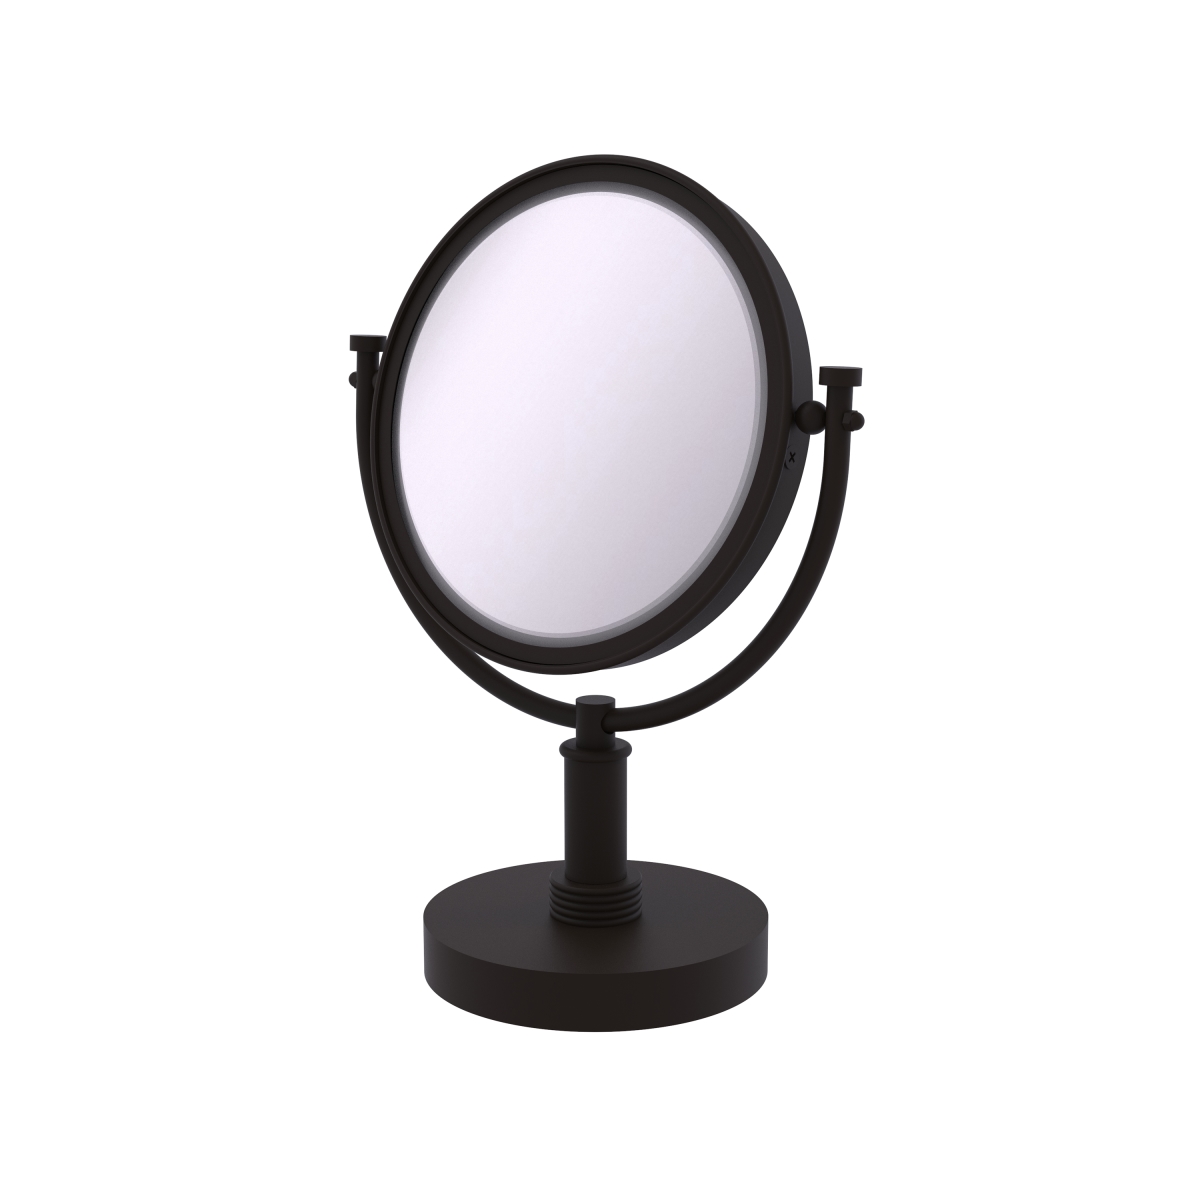 Dm-4g-3x-orb Grooved Ring Style 8 In. Vanity Top Make-up Mirror 3x Magnification, Oil Rubbed Bronze